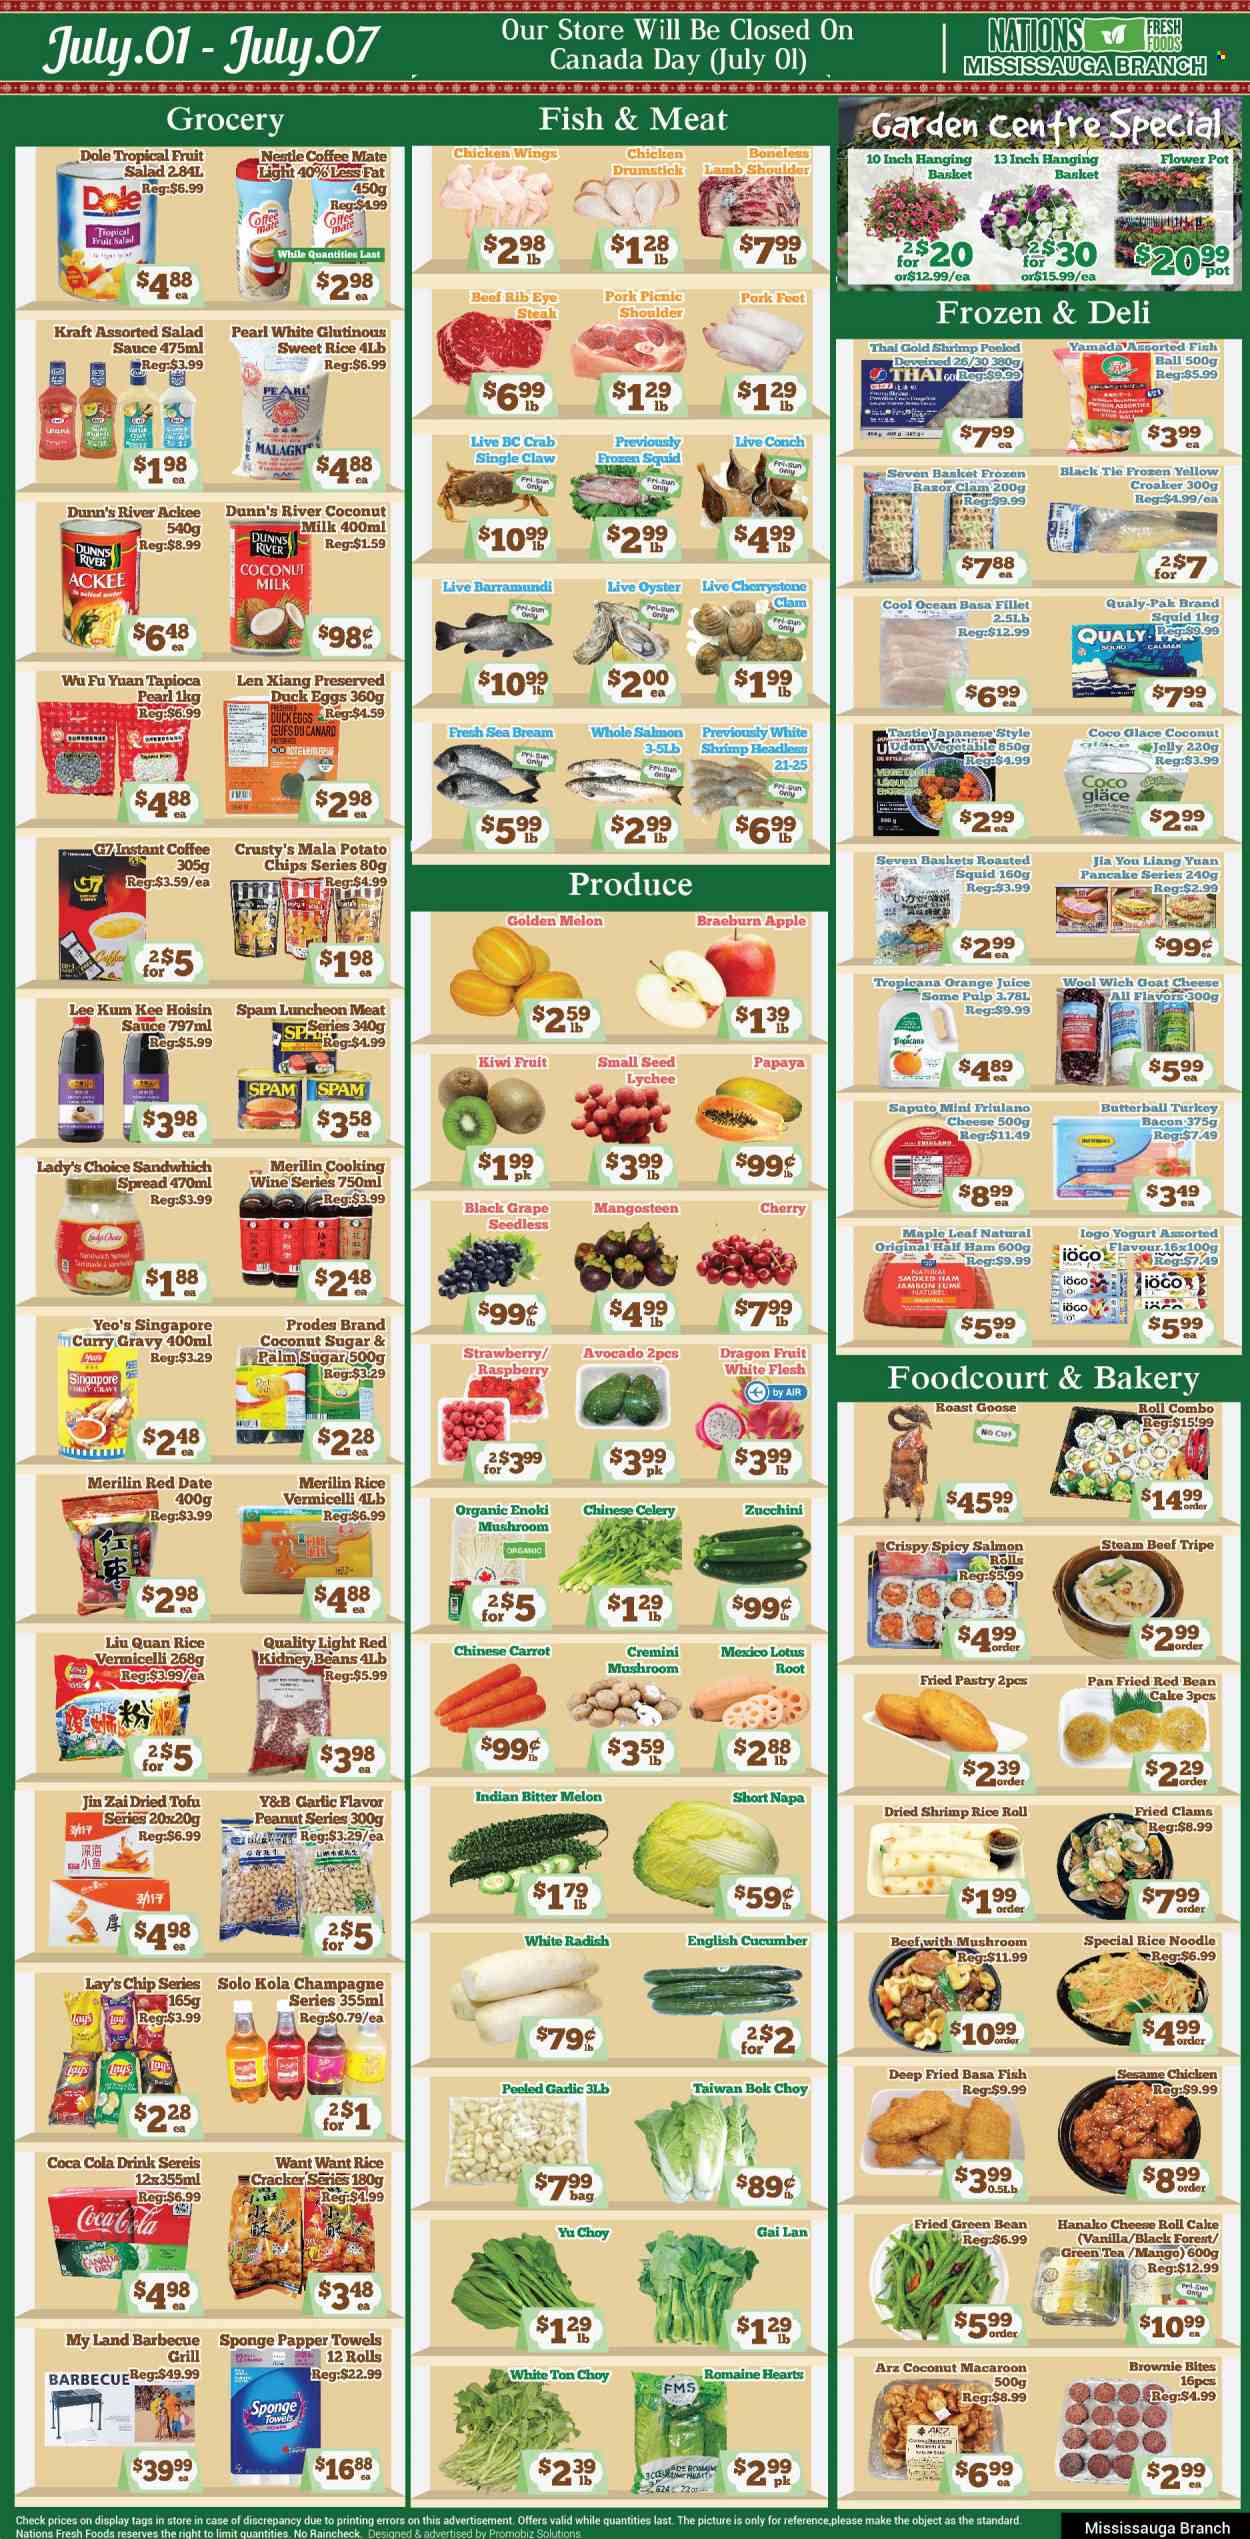 thumbnail - Nations Fresh Foods Flyer - July 01, 2022 - July 07, 2022 - Sales products - cake, brownies, bok choy, celery, garlic, radishes, zucchini, salad, Dole, white radish, avocado, lychee, papaya, melons, dragon fruit, barramundi, clams, salmon, squid, oysters, crab, seabream, shrimps, sauce, pancakes, noodles, Kraft®, bacon, Butterball, turkey bacon, half ham, ham, smoked ham, Spam, lunch meat, goat cheese, tofu, yoghurt, Coffee-Mate, eggs, chicken wings, jelly, crackers, potato chips, Lay’s, cheese rolls, rice crackers, coconut sugar, coconut milk, kidney beans, fruit salad, rice vermicelli, hoisin sauce, Lee Kum Kee, Coca-Cola, orange juice, juice, green tea, tea, instant coffee, cooking wine, beef meat, beef tripe, ribeye steak, lamb meat, lamb shoulder, Nestlé, champagne, steak. Page 1.